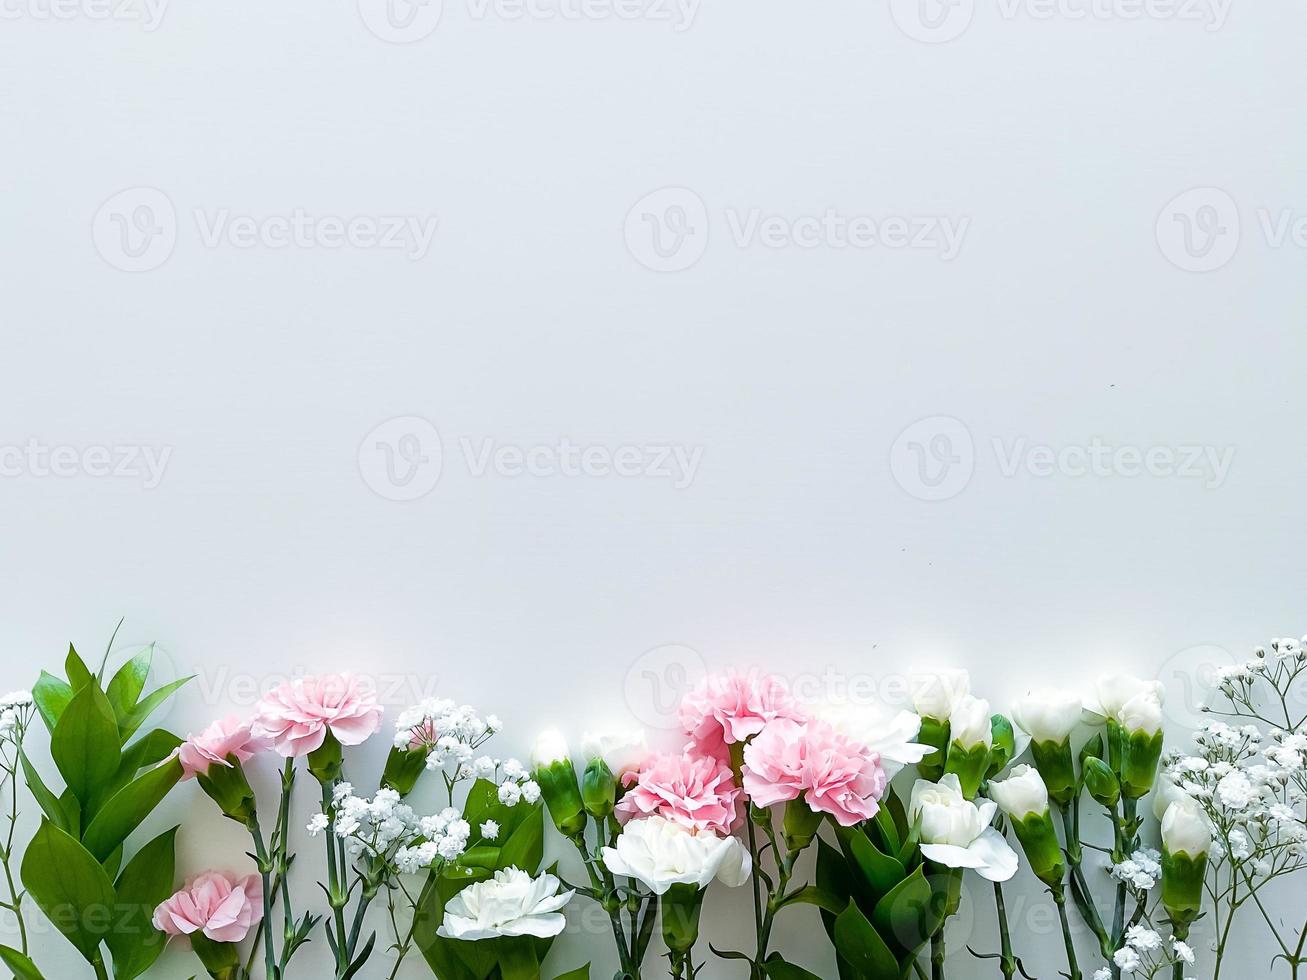 Close up photo of a bouquet of pink and white